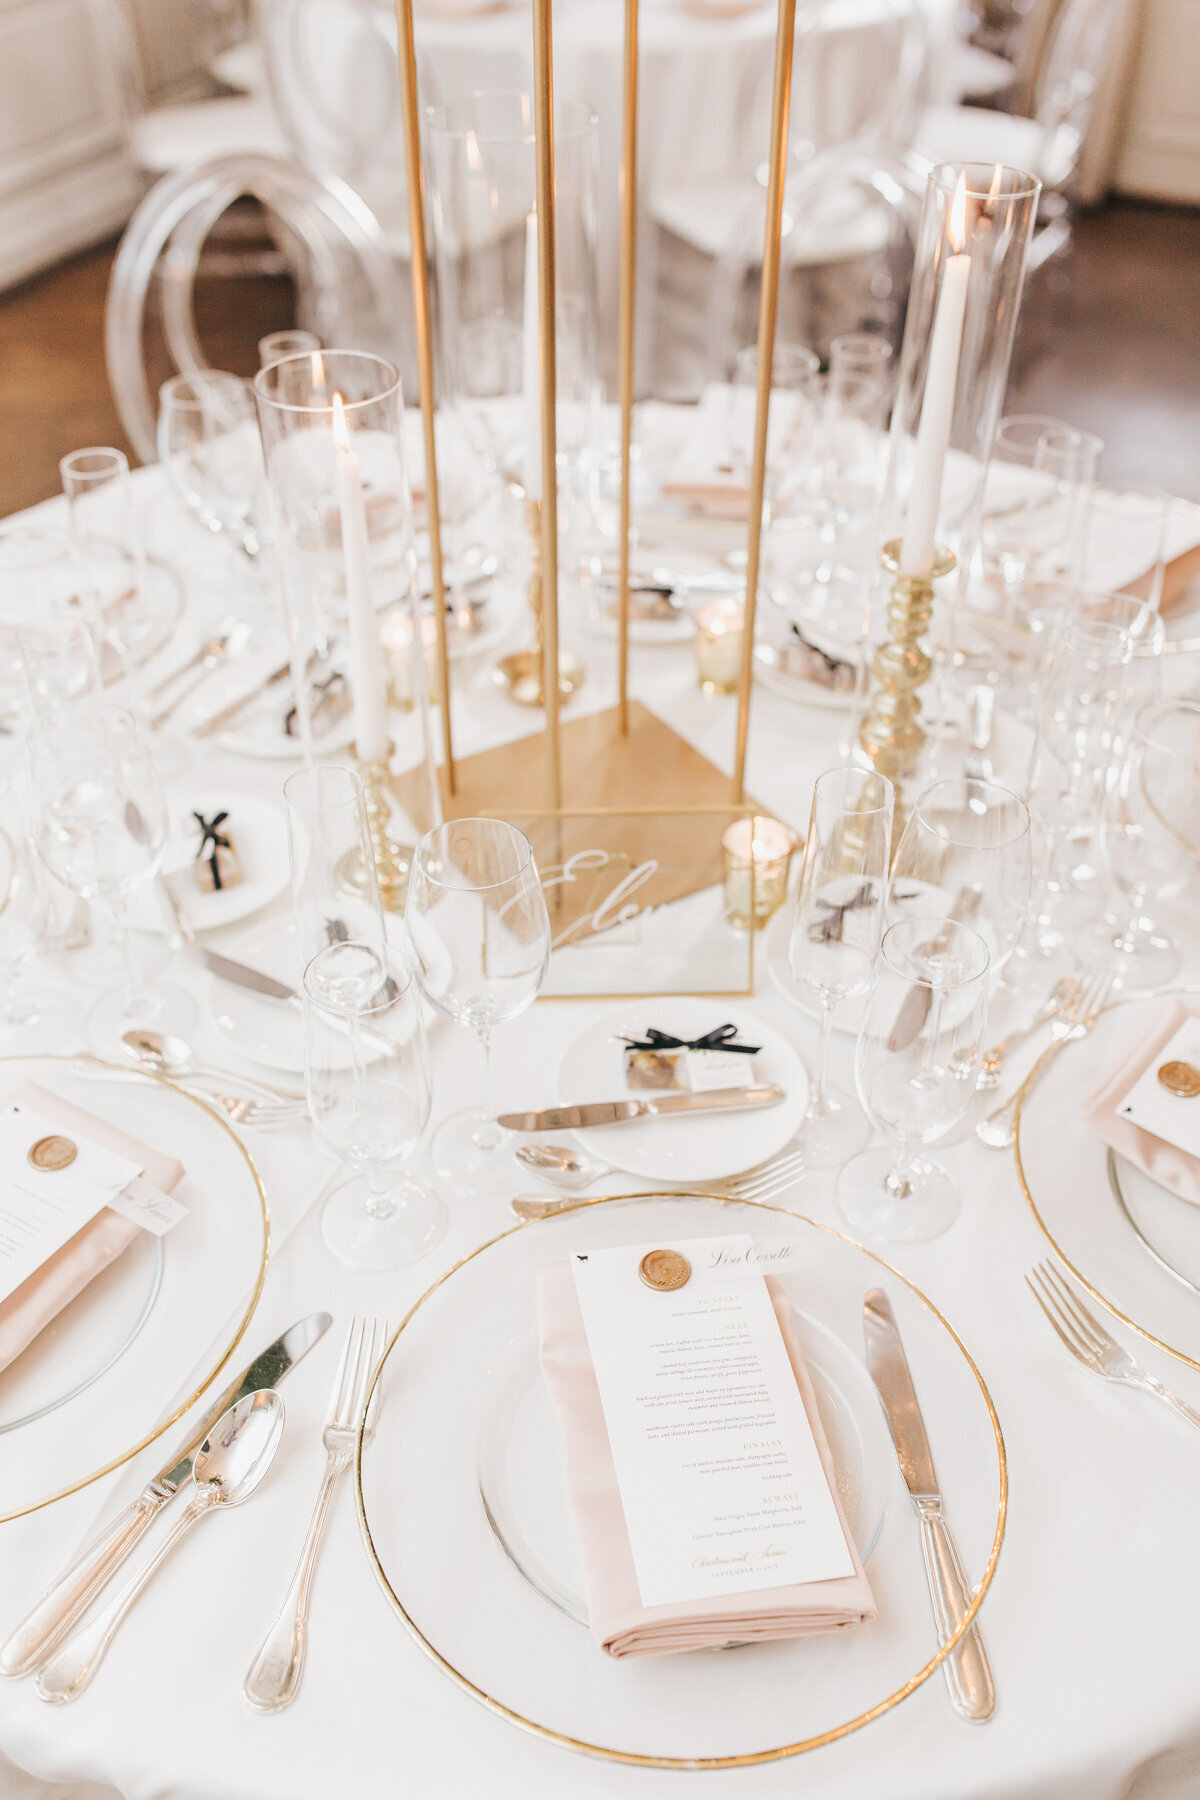 Luxurious wedding dinnerware with crystal plates and gold accents